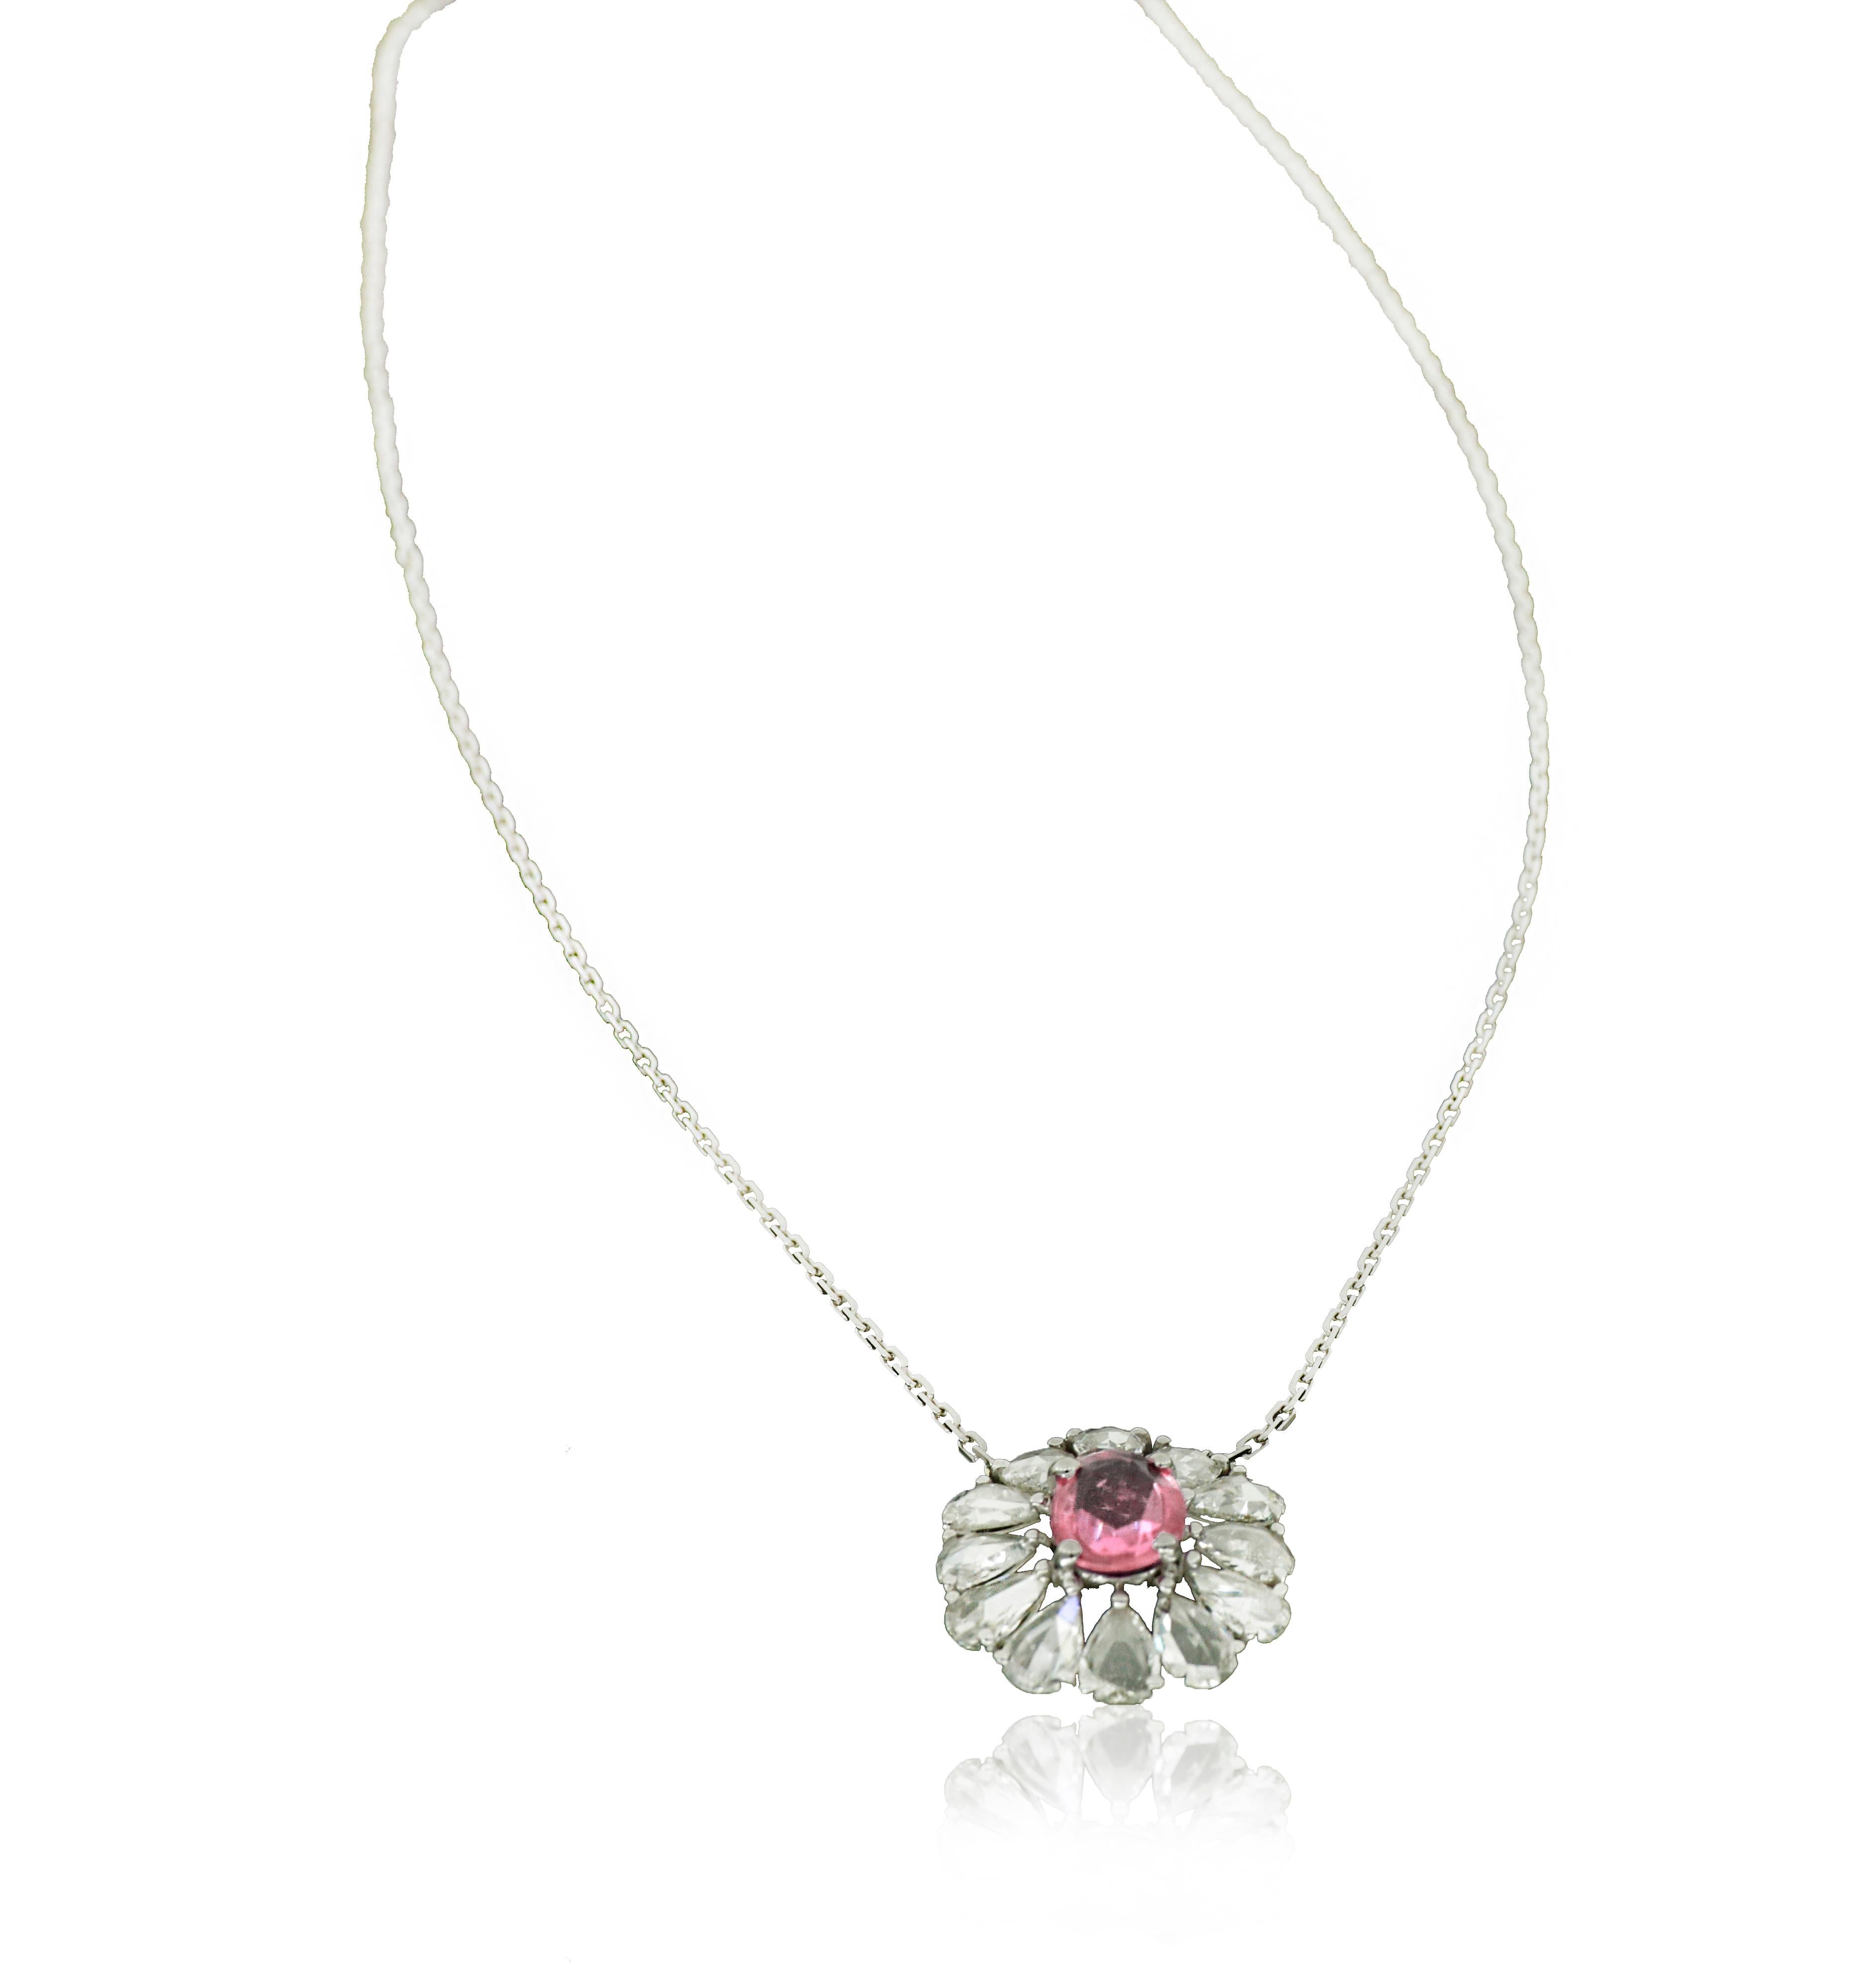 Charming, floral 18K White Gold Pendant by Amwaj Jewelry with pear shape rose cut Diamonds ,delicately set with pink sapphire to make a perfect assemble for this Pendant . It makes an illusion of flower and replicate nature’s ephemeral beauty in